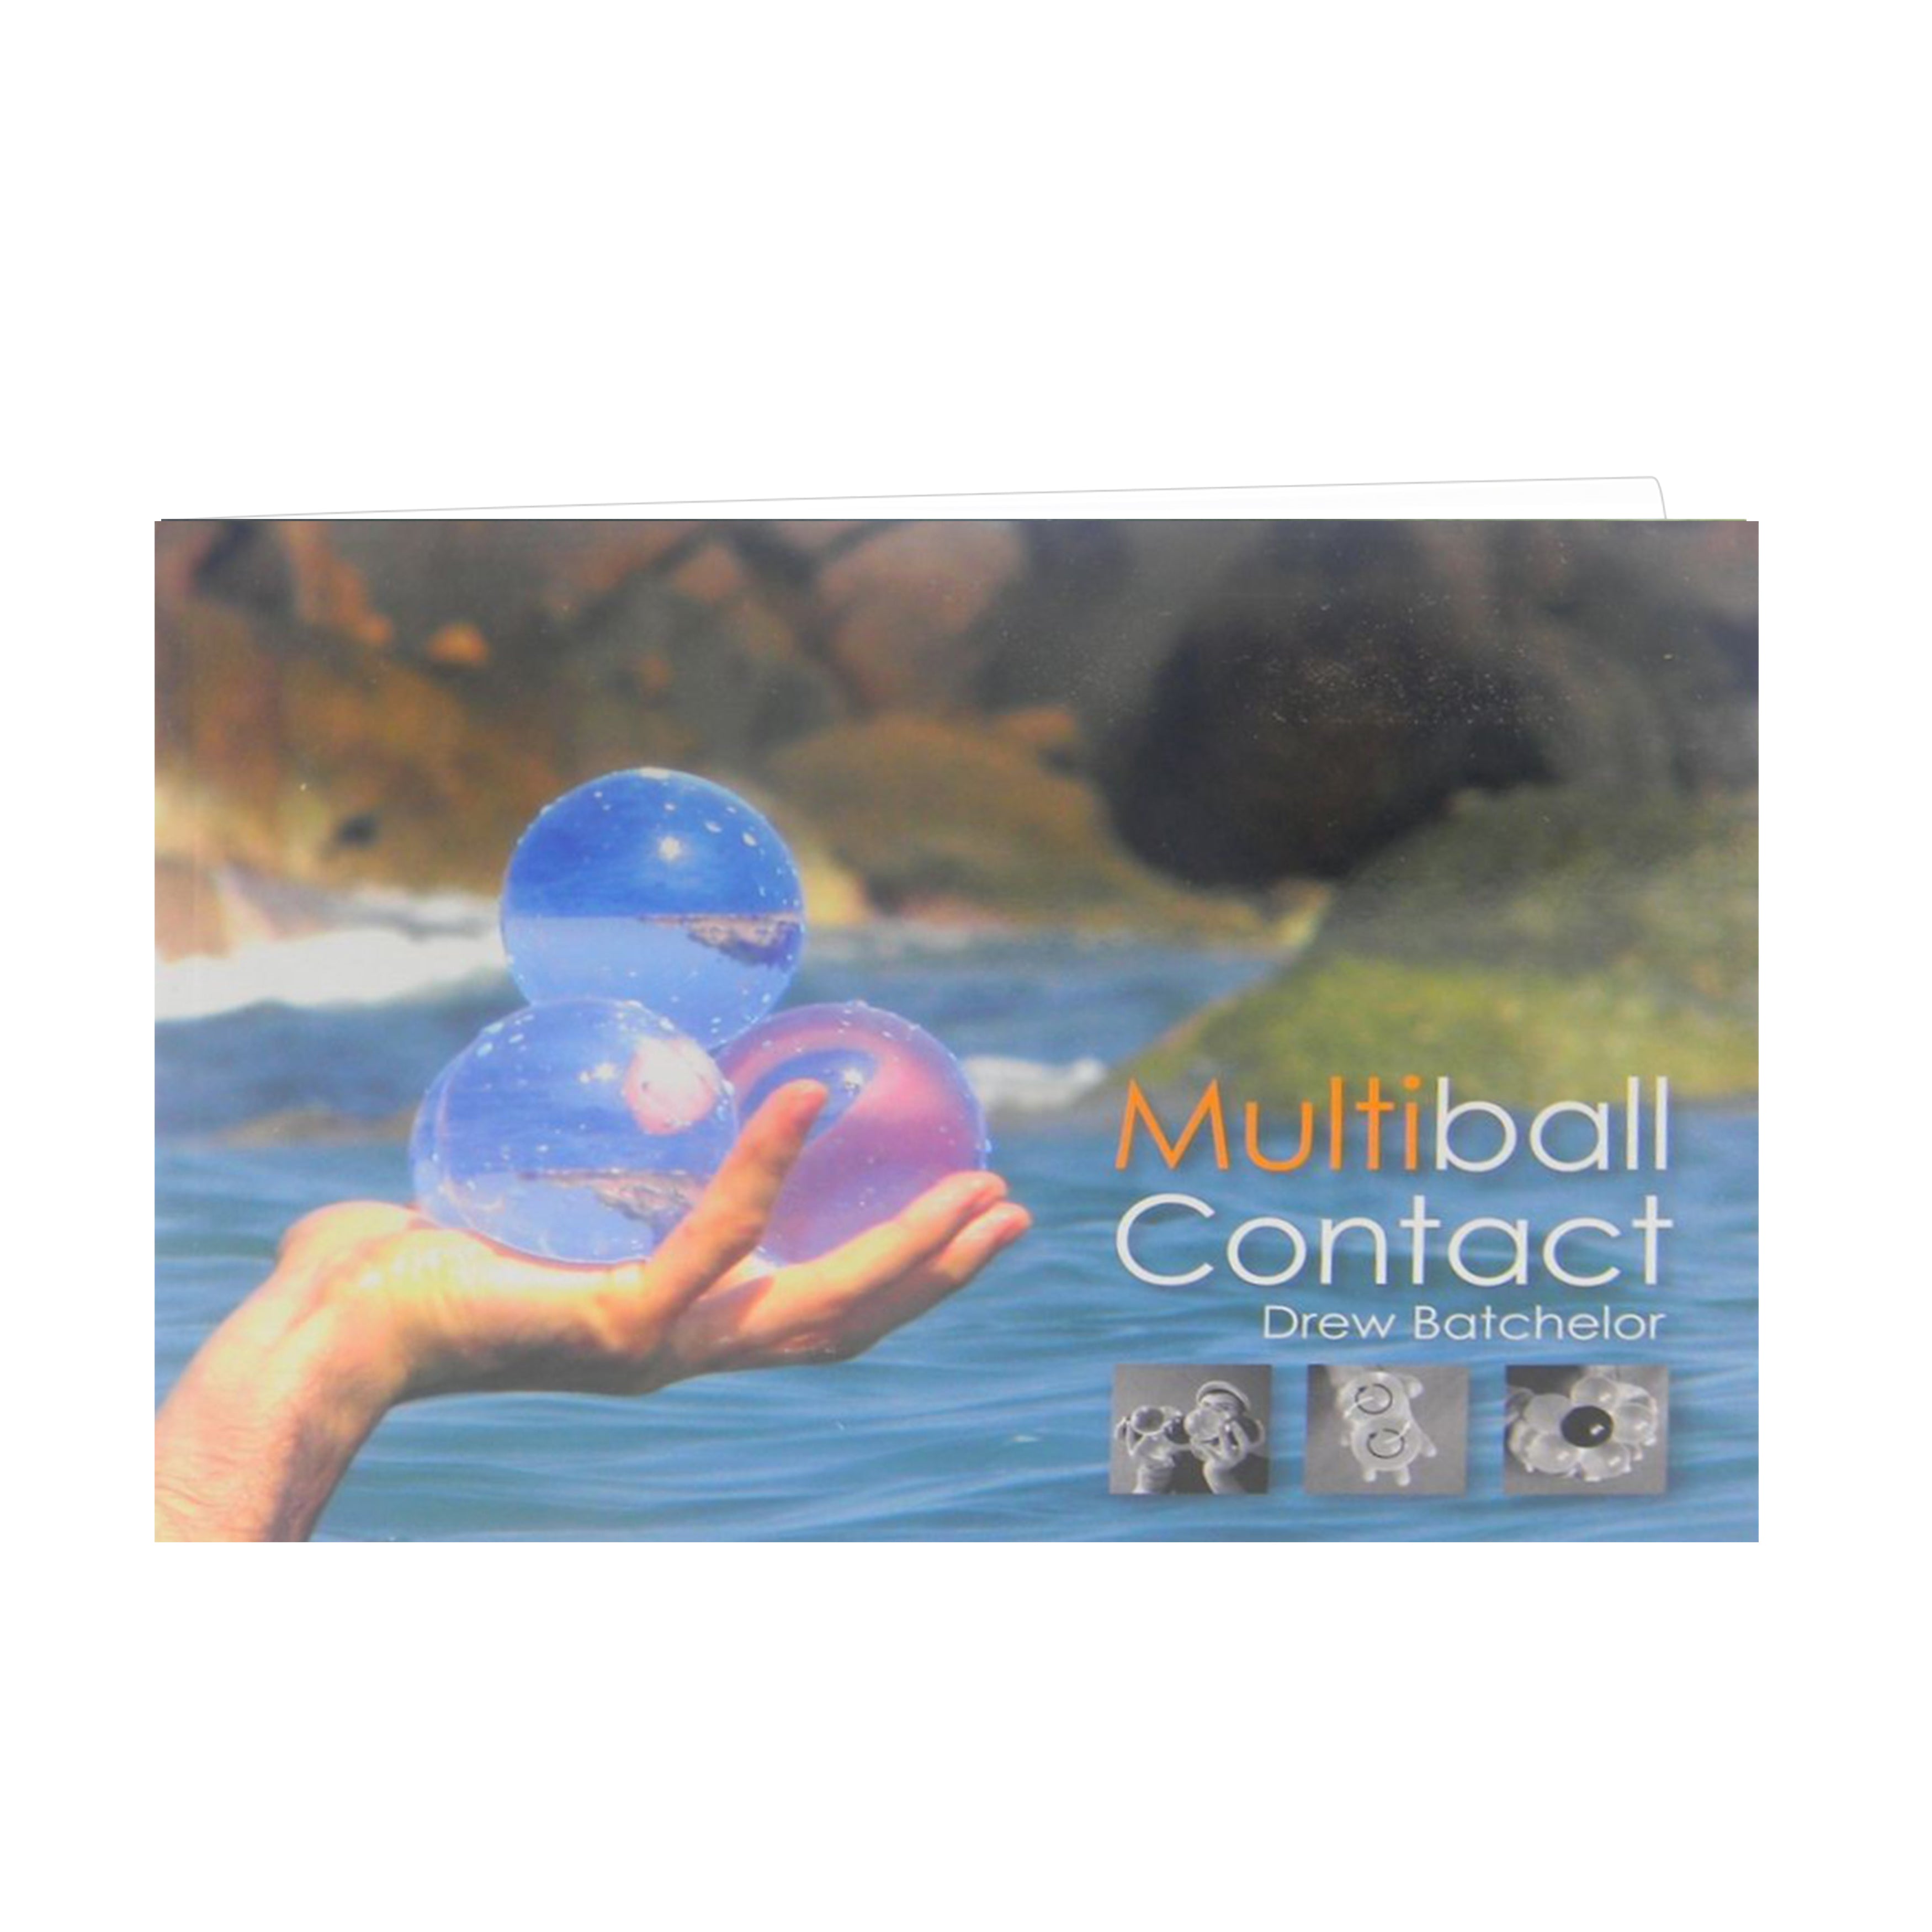 MultiBall Contact Book by Drew Batchelor